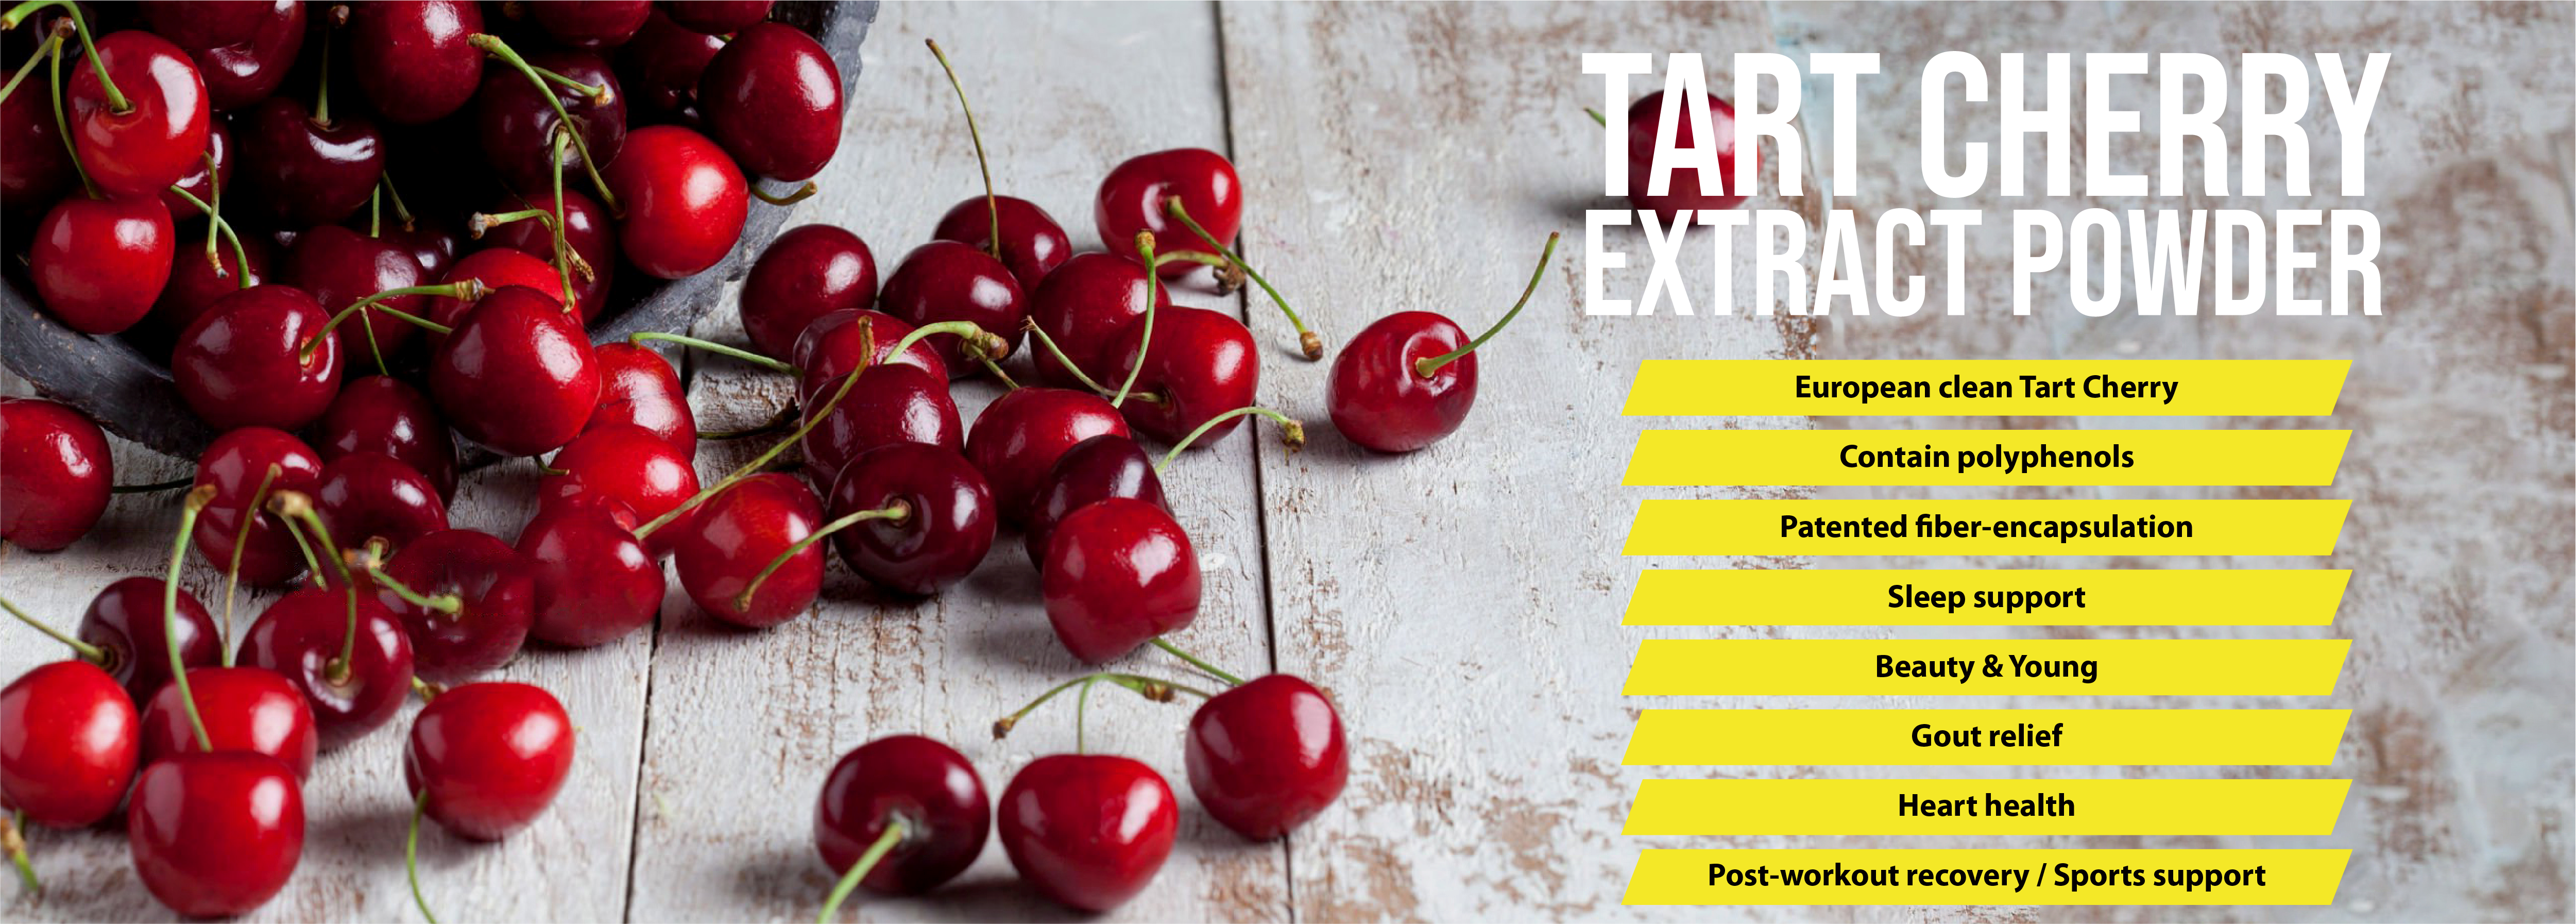 Tart Cherry Extract Powder supply in bulk and wholesale